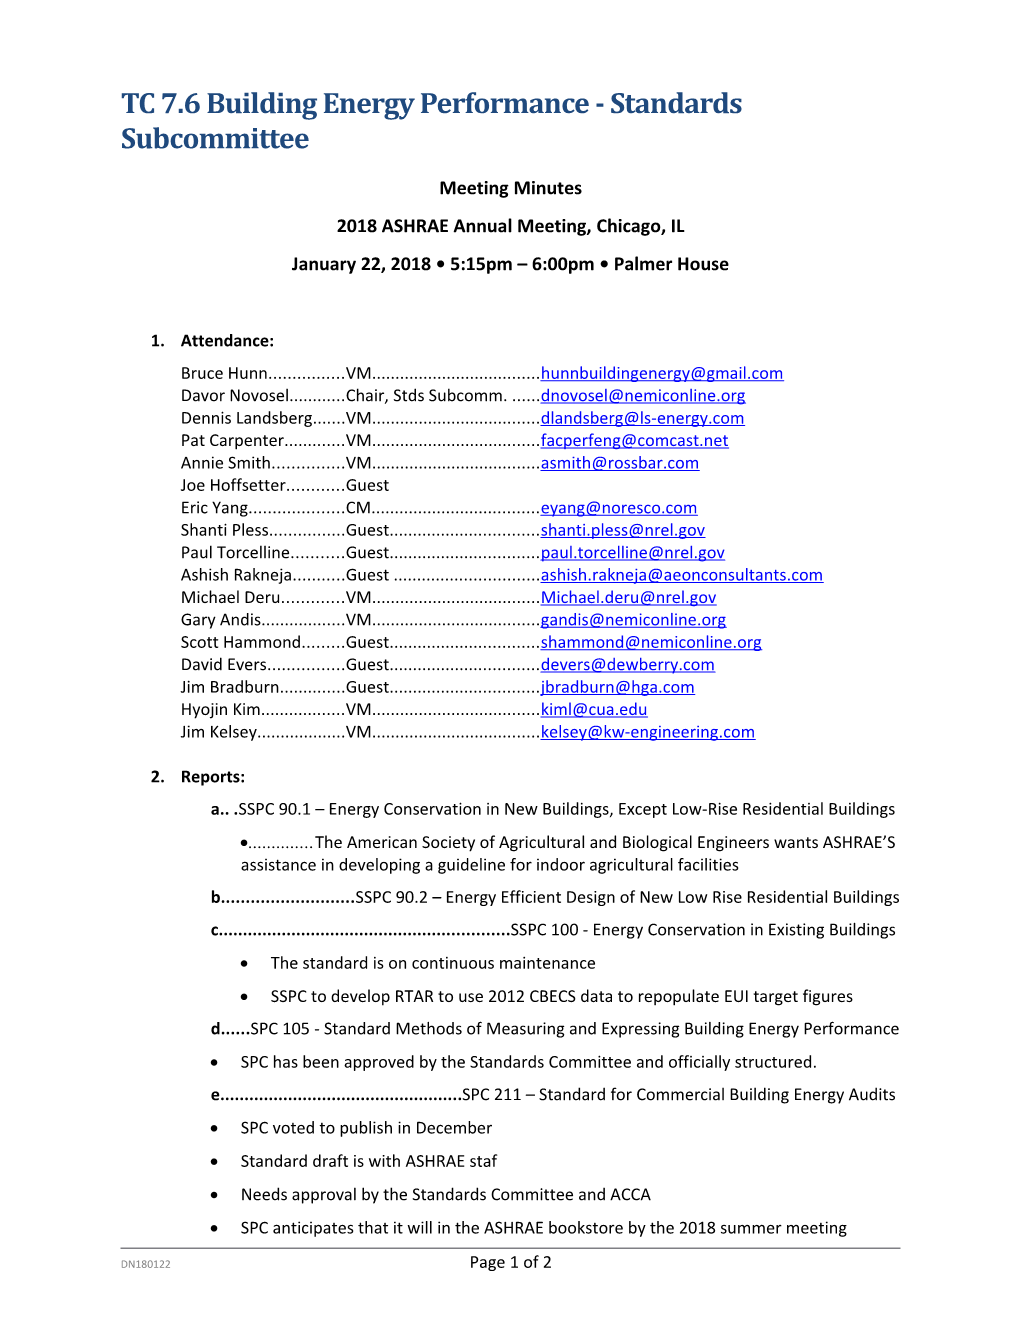 TC 7.6 Building Energy Performance - Standards Subcommittee